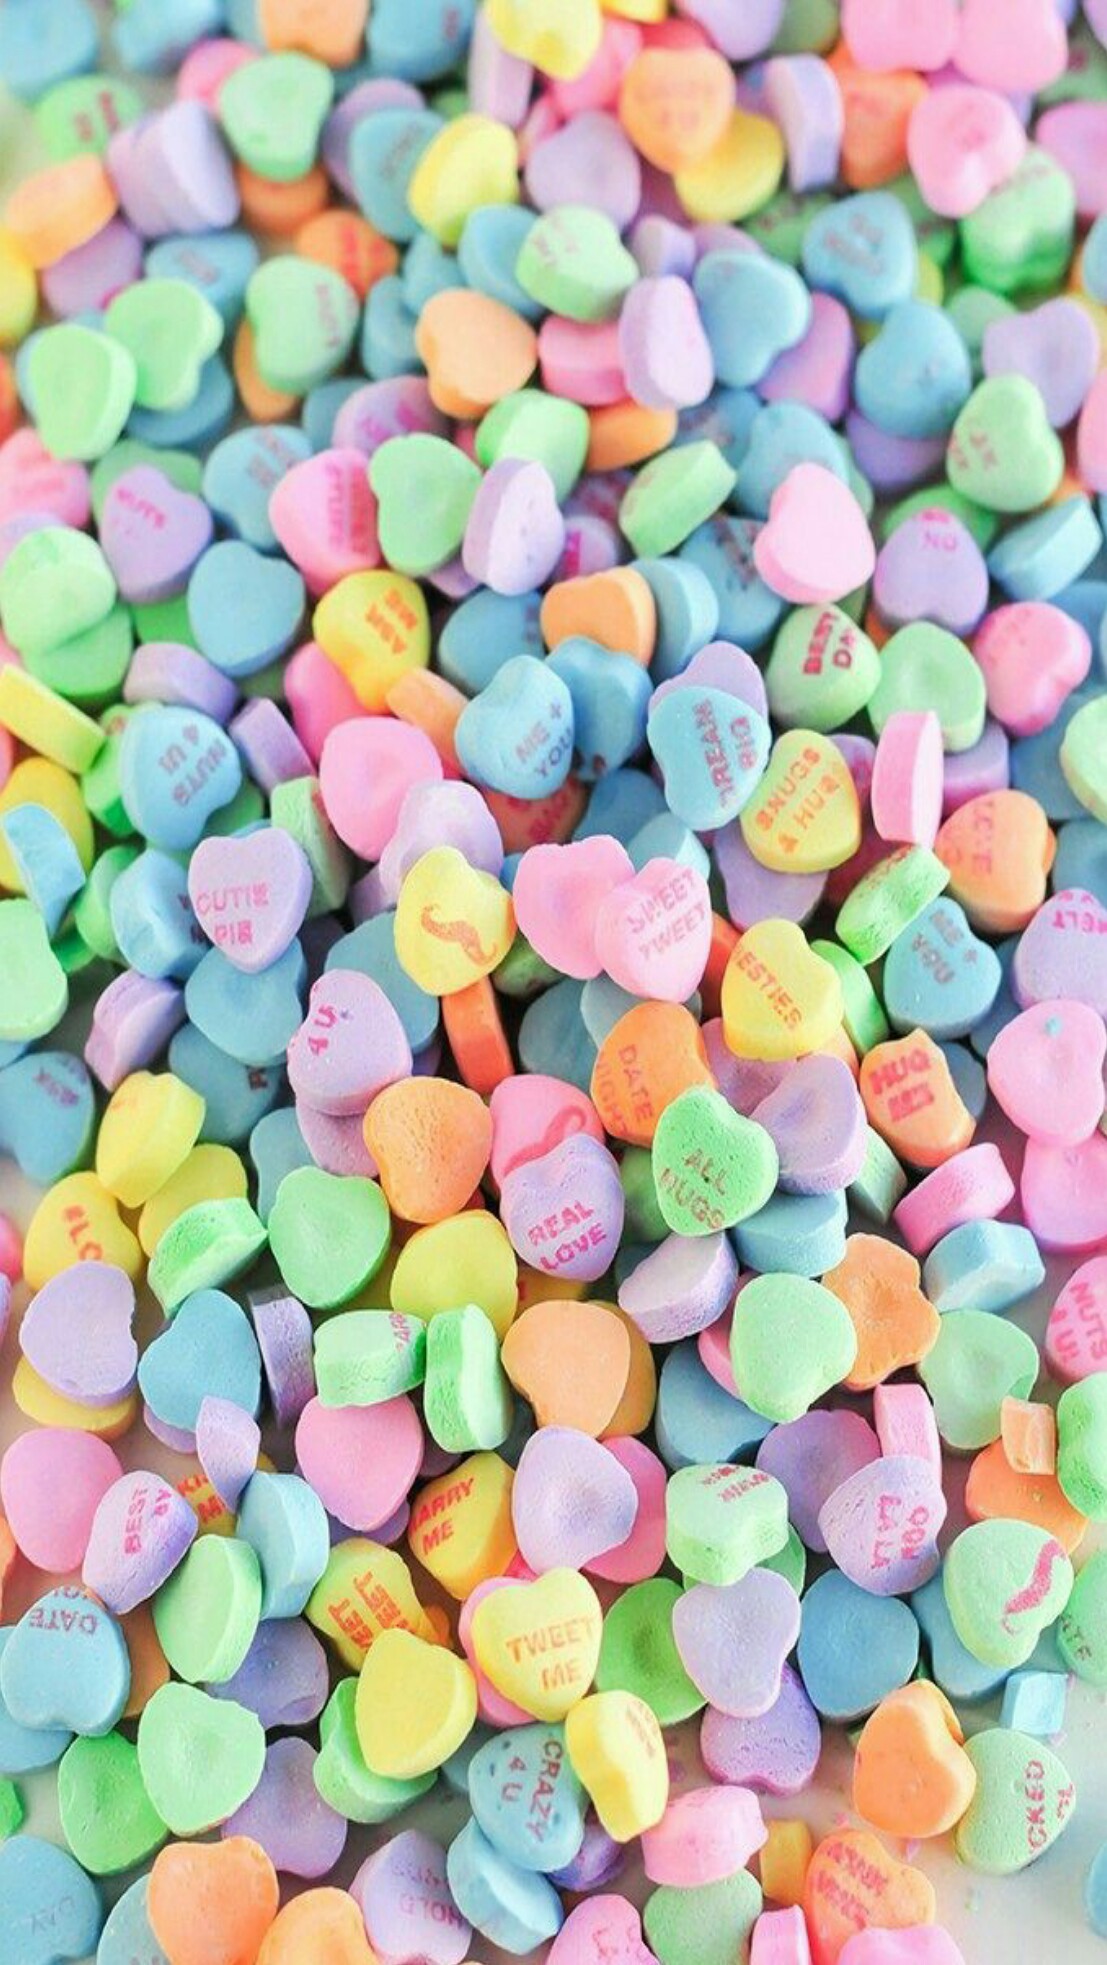 Candy Hearts Wallpaper (60+ images)